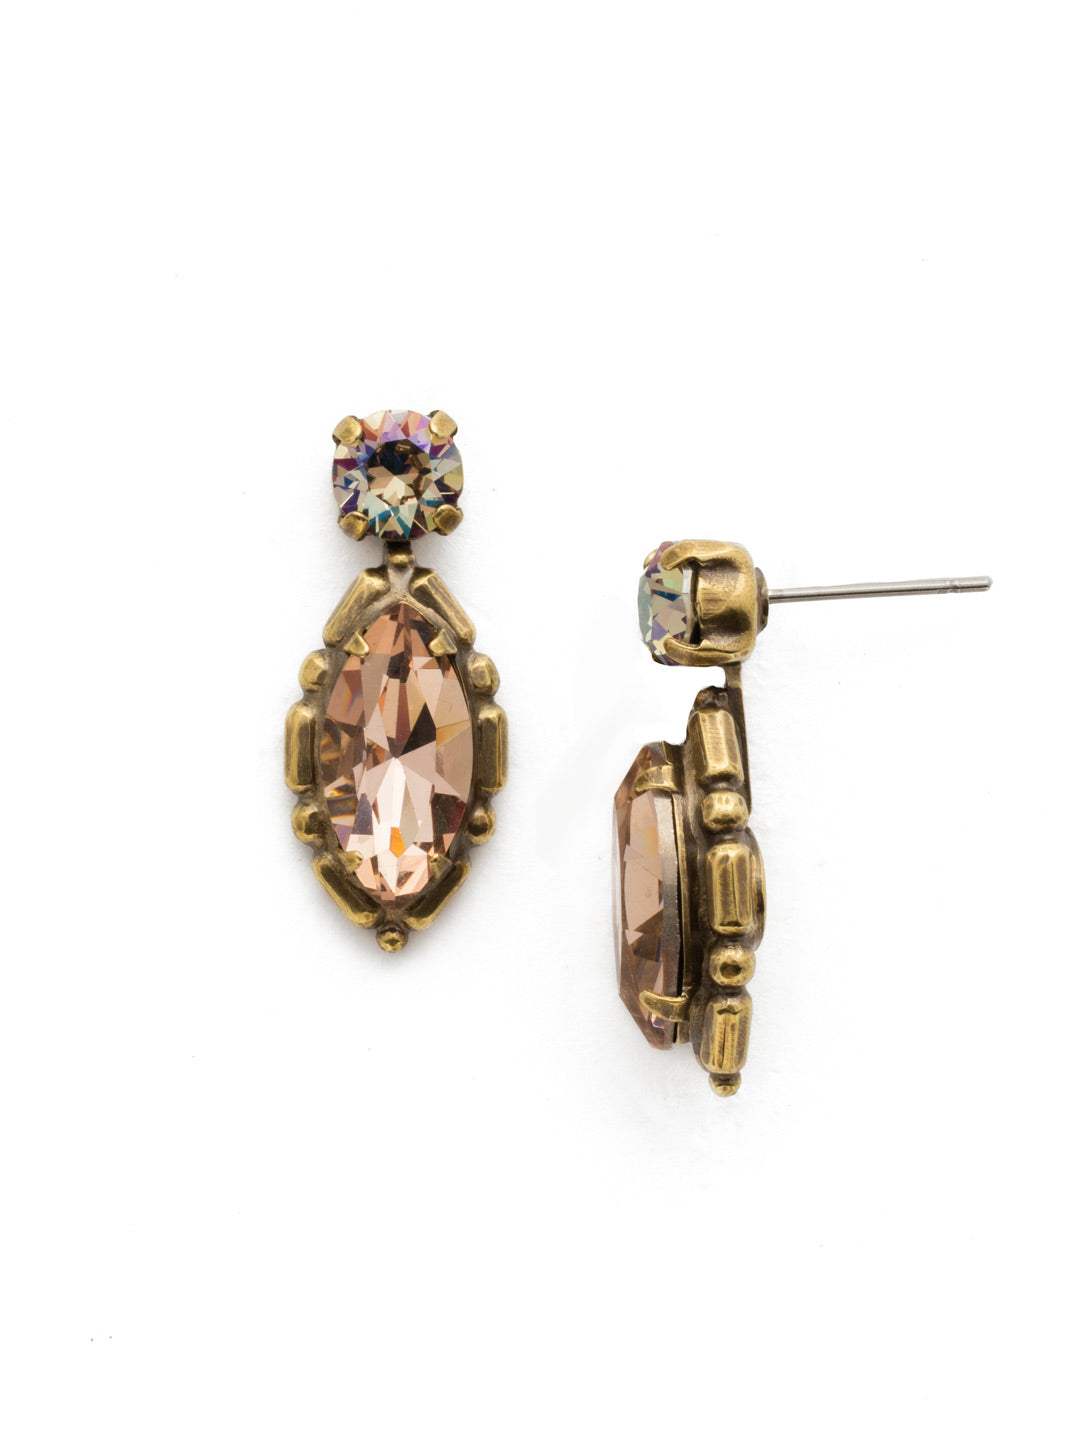 Cardoon Dangle Earrings - EDX7AGSTN - A navette stone in a detailed setting hangs from a round crystal to create this beautiful dangle earring. From Sorrelli's Sandstone collection in our Antique Gold-tone finish.